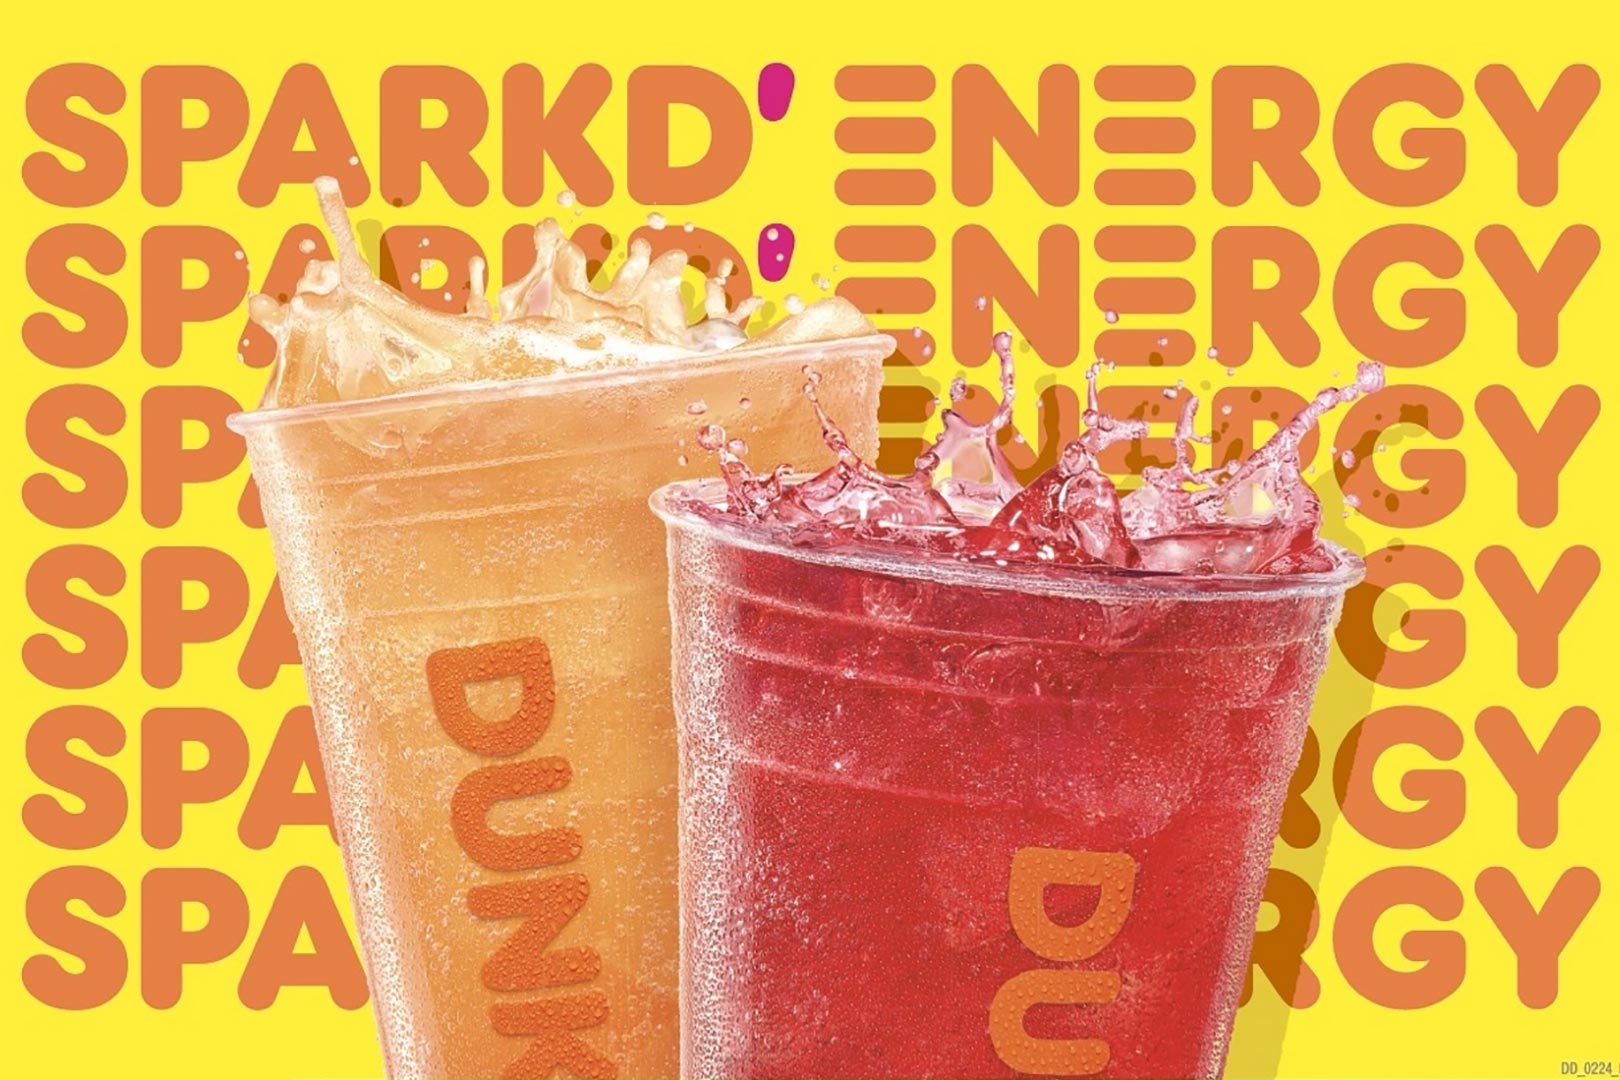 Dunkin’ introduces its own energy drink with as much as 192mg of caffeine in two flavors